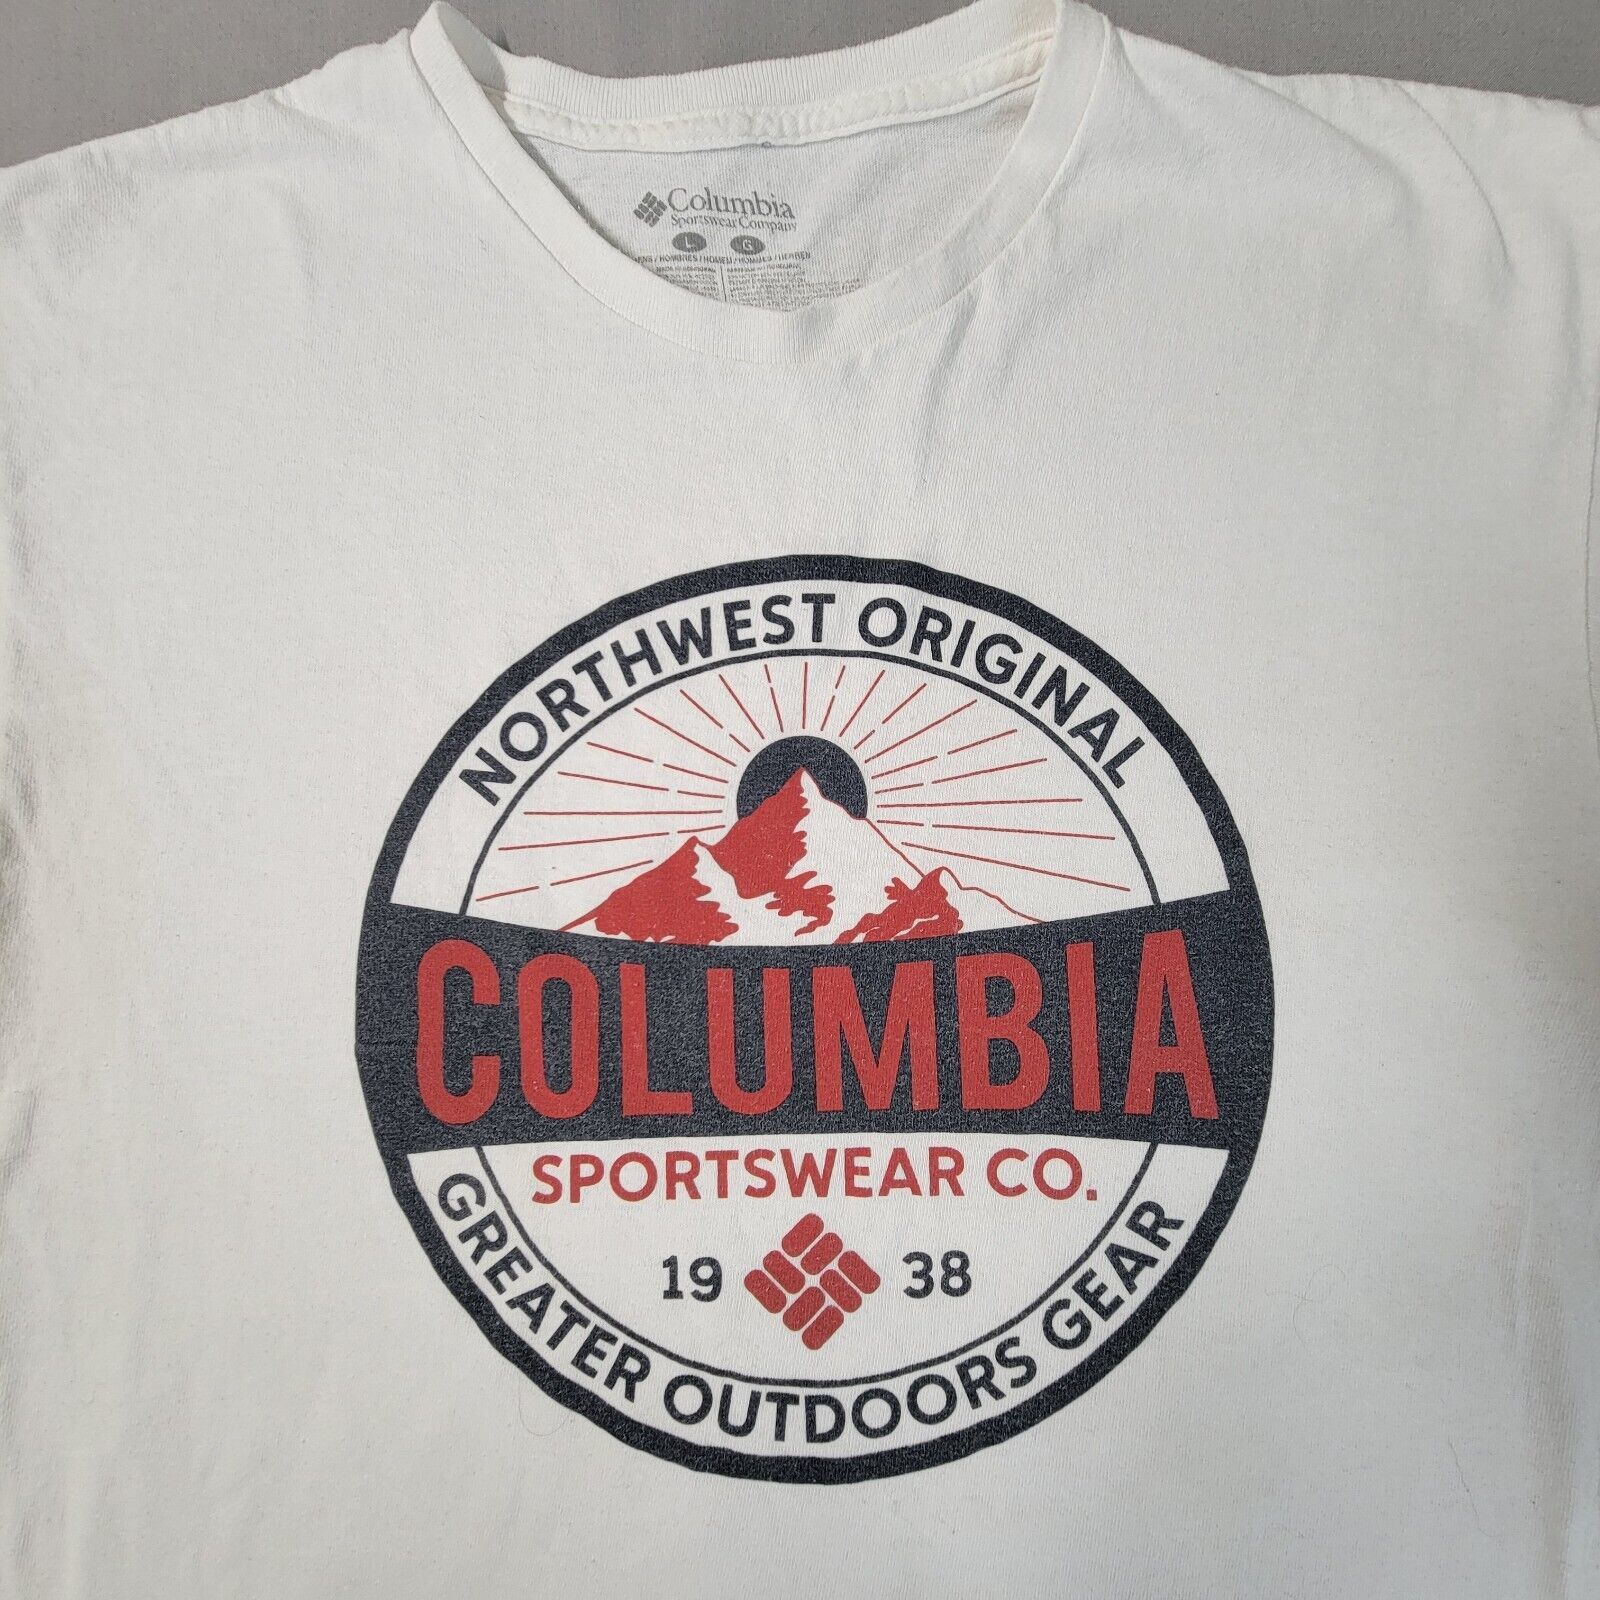 Primary image for Columbia Sportswear Men's Outdoor Logo Short Sleeve Graphic T Shirt Northwest